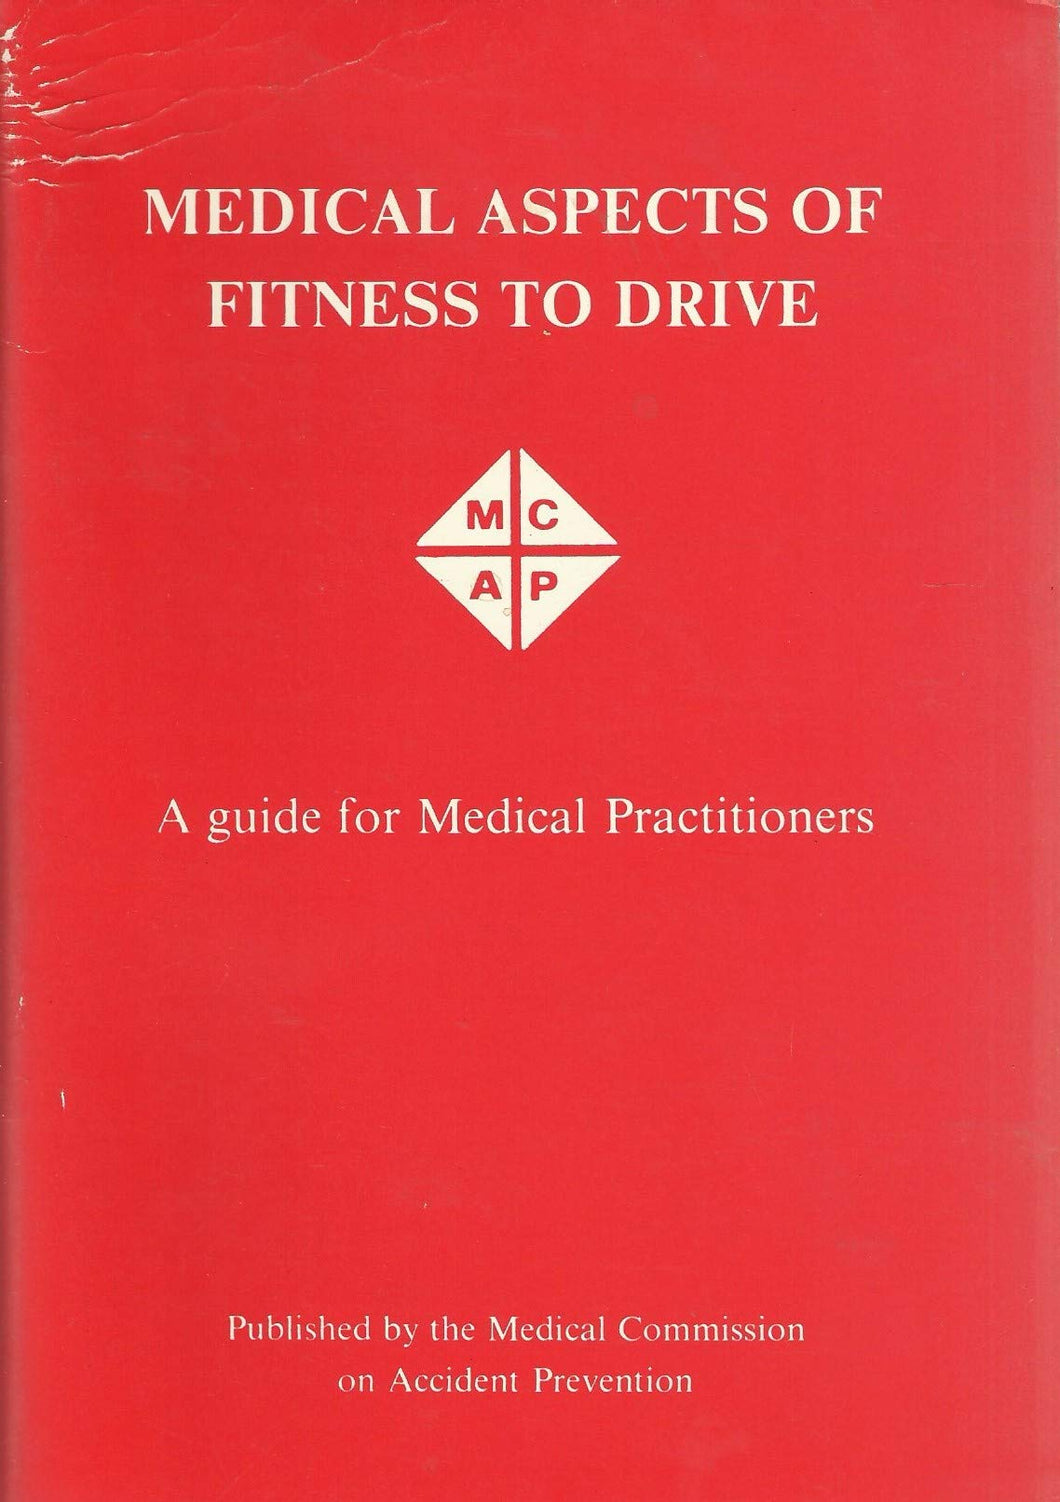 Medical Aspects of Fitness to Drive: A Guide for Medical Practitioners (4th Edition)